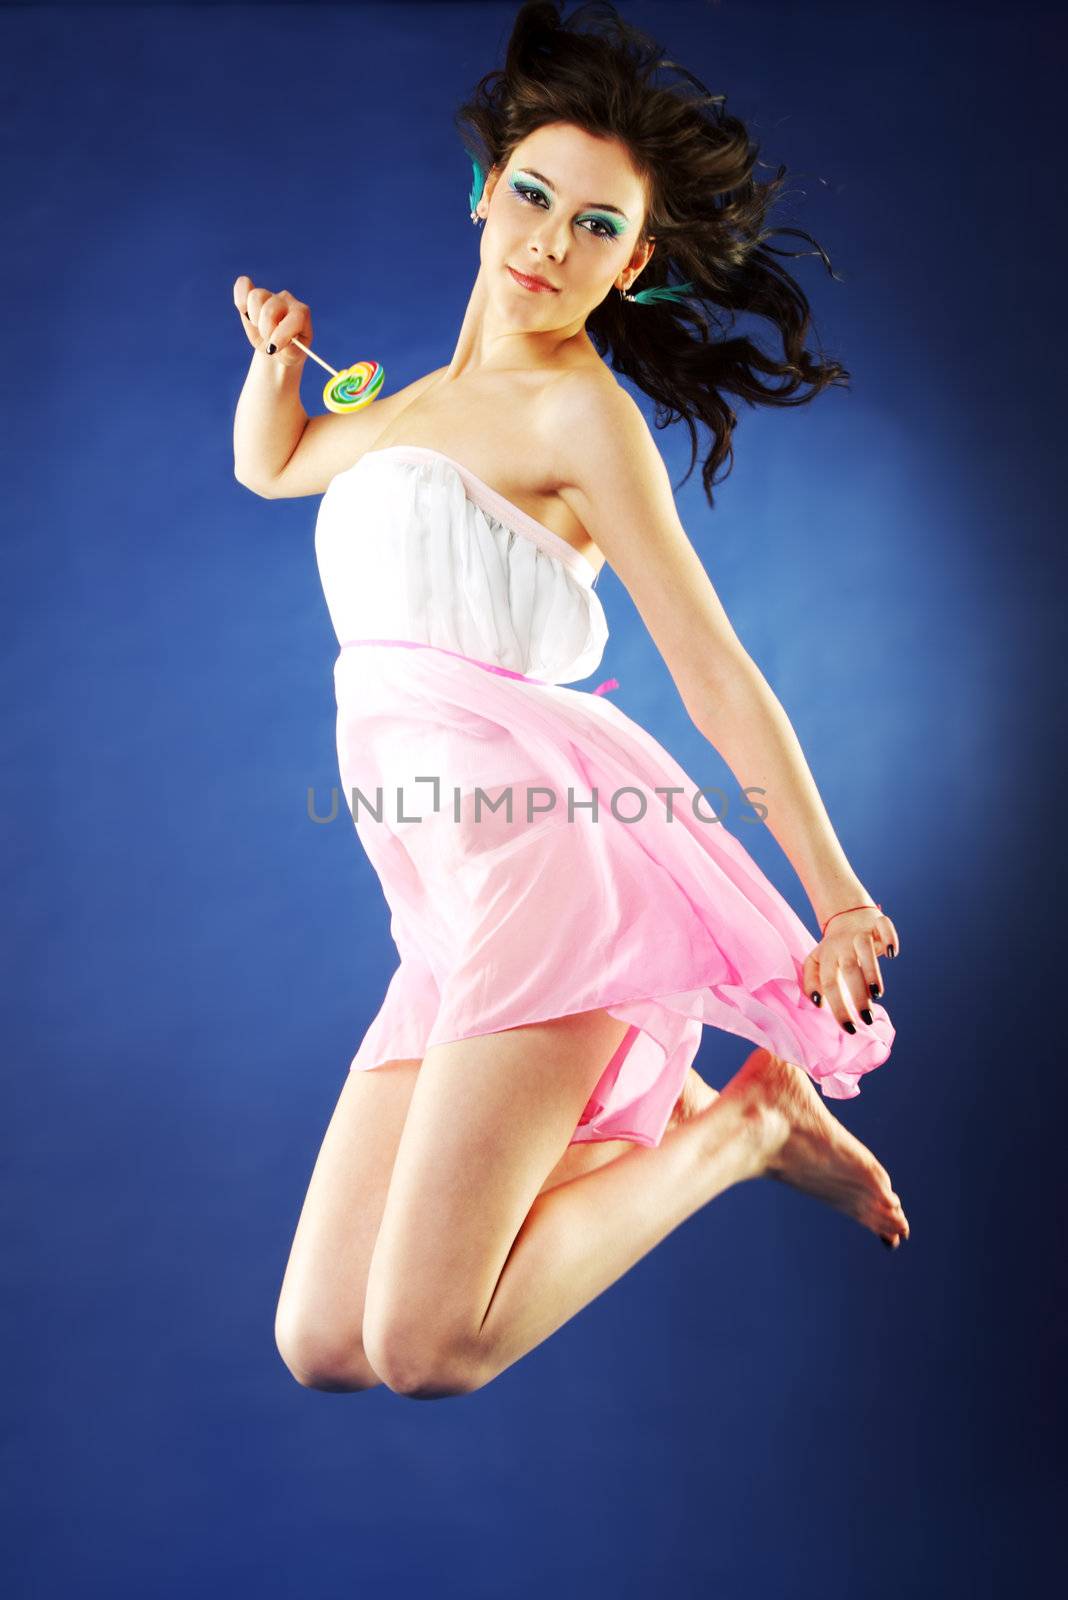 Young beautiful girl jumping in the air holding lollipop on blue